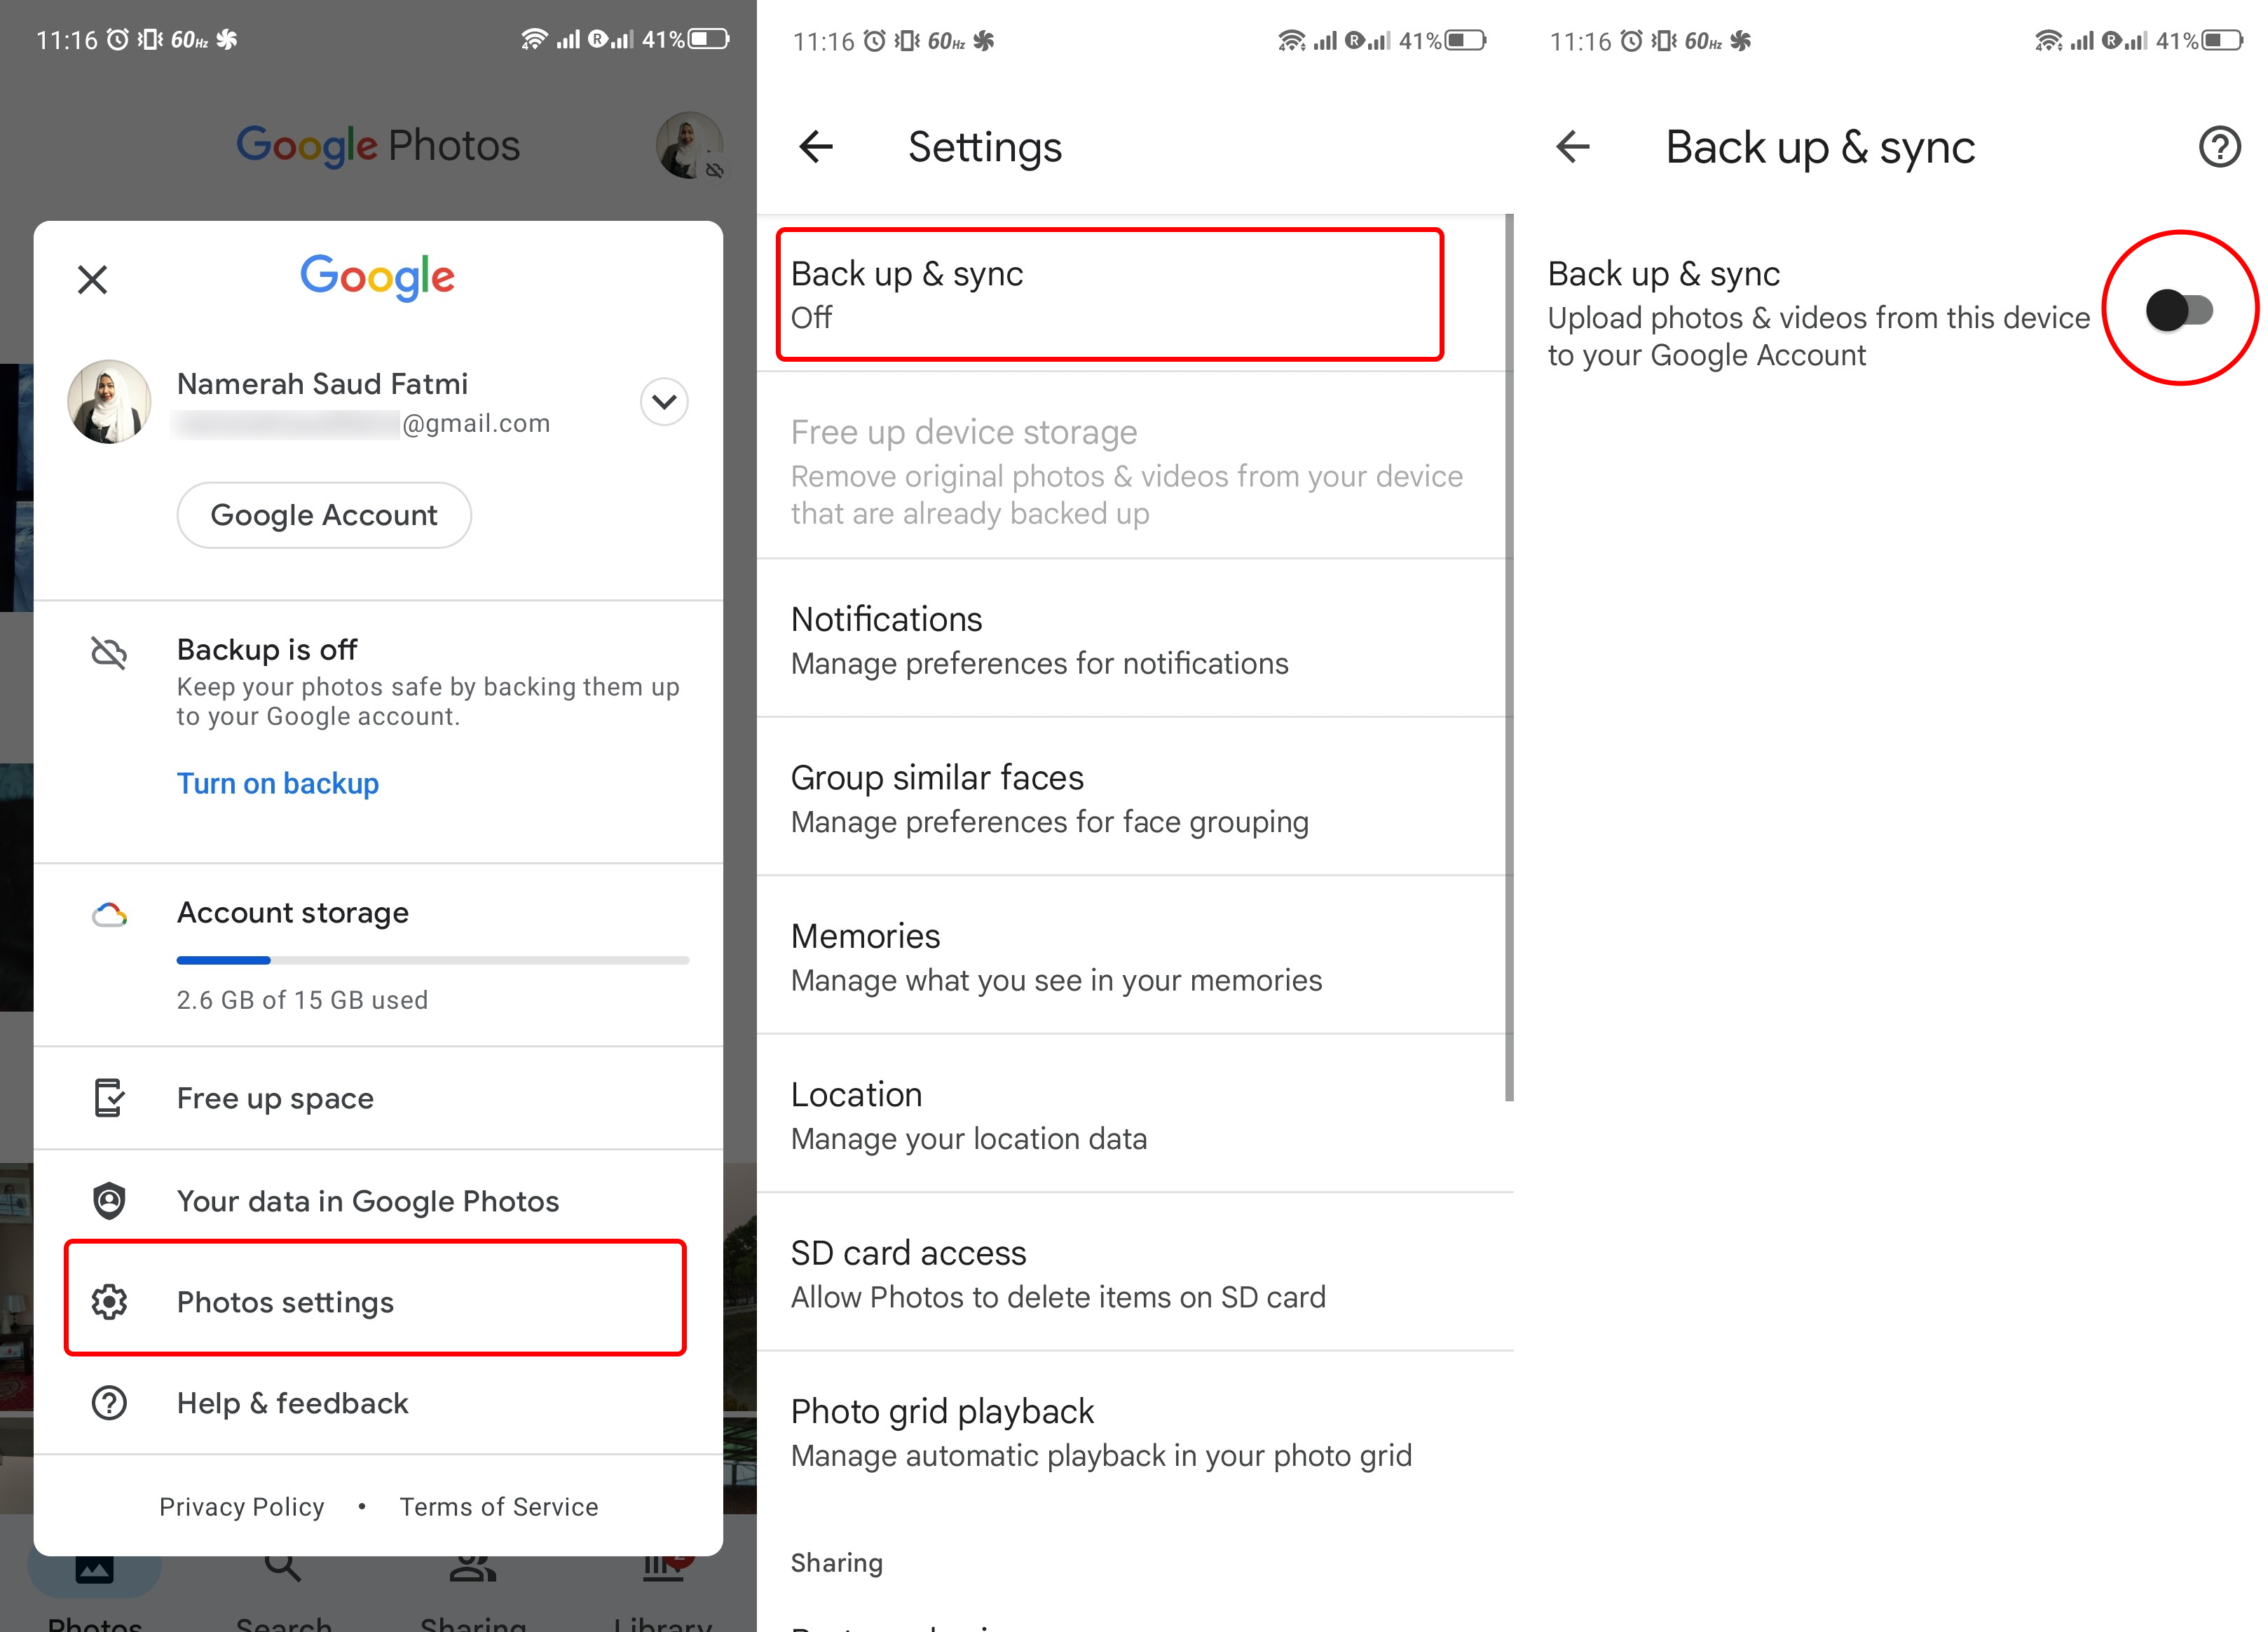 Steps showing how to enable backup and sync on Google Photos for Android